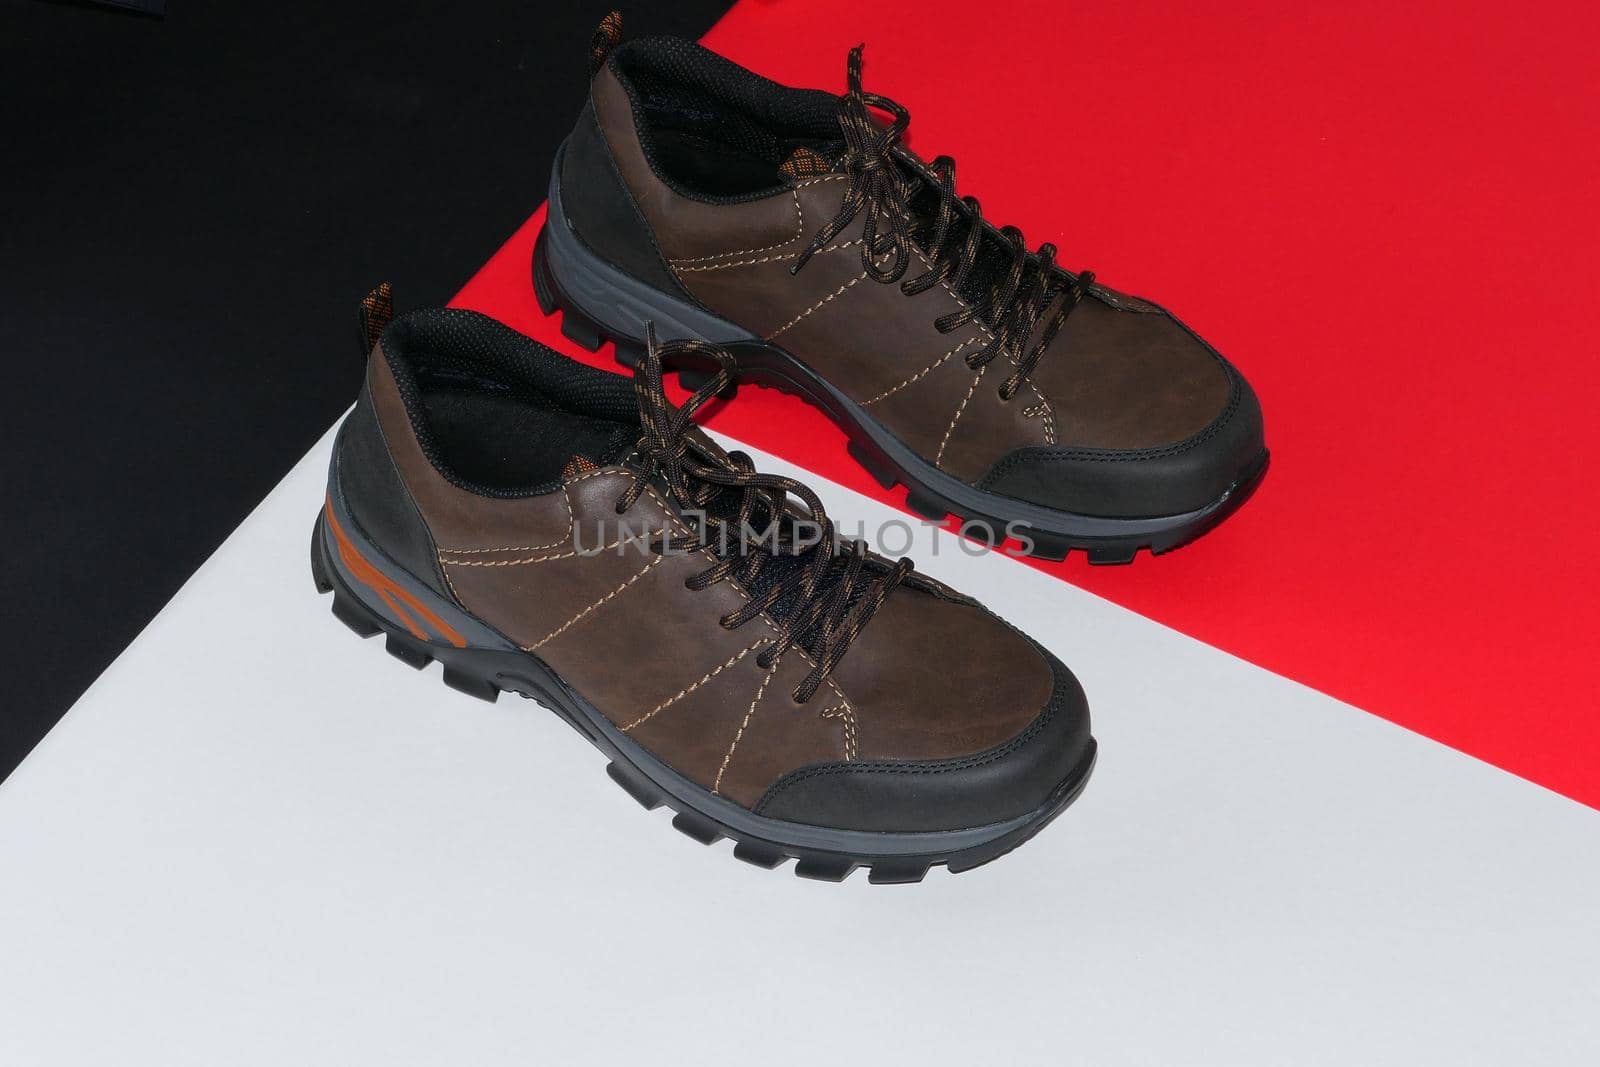 Stylish men's sneakers or leather brown shoes on a colored background.